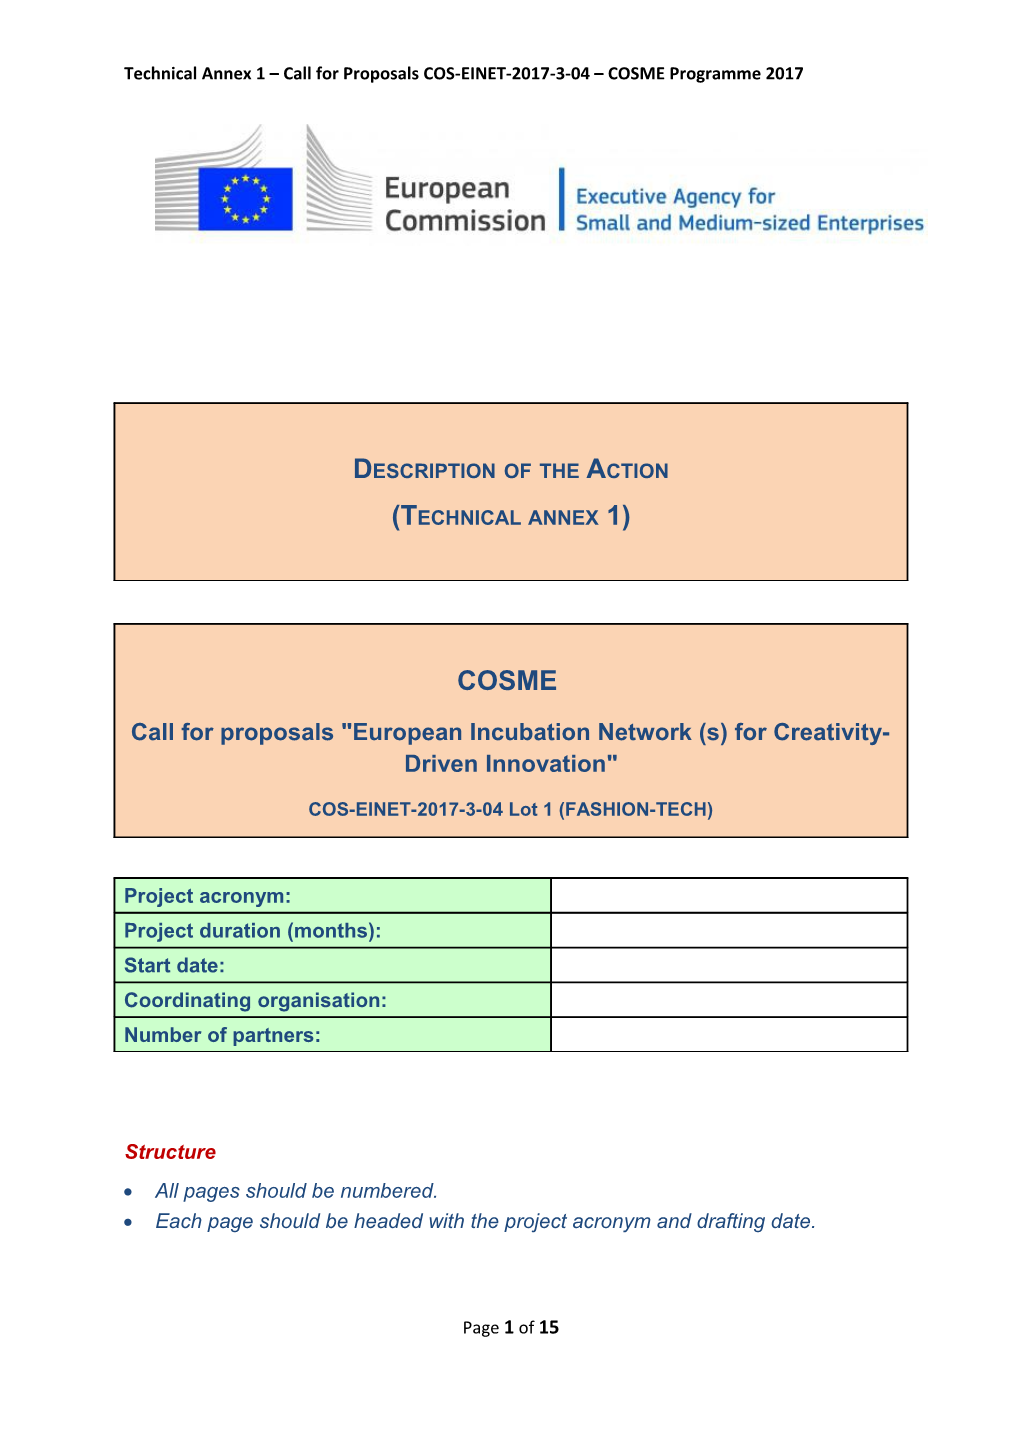 Technical Annex 1 Call for Proposals COS-EINET-2017-3-04 COSME Programme 2017